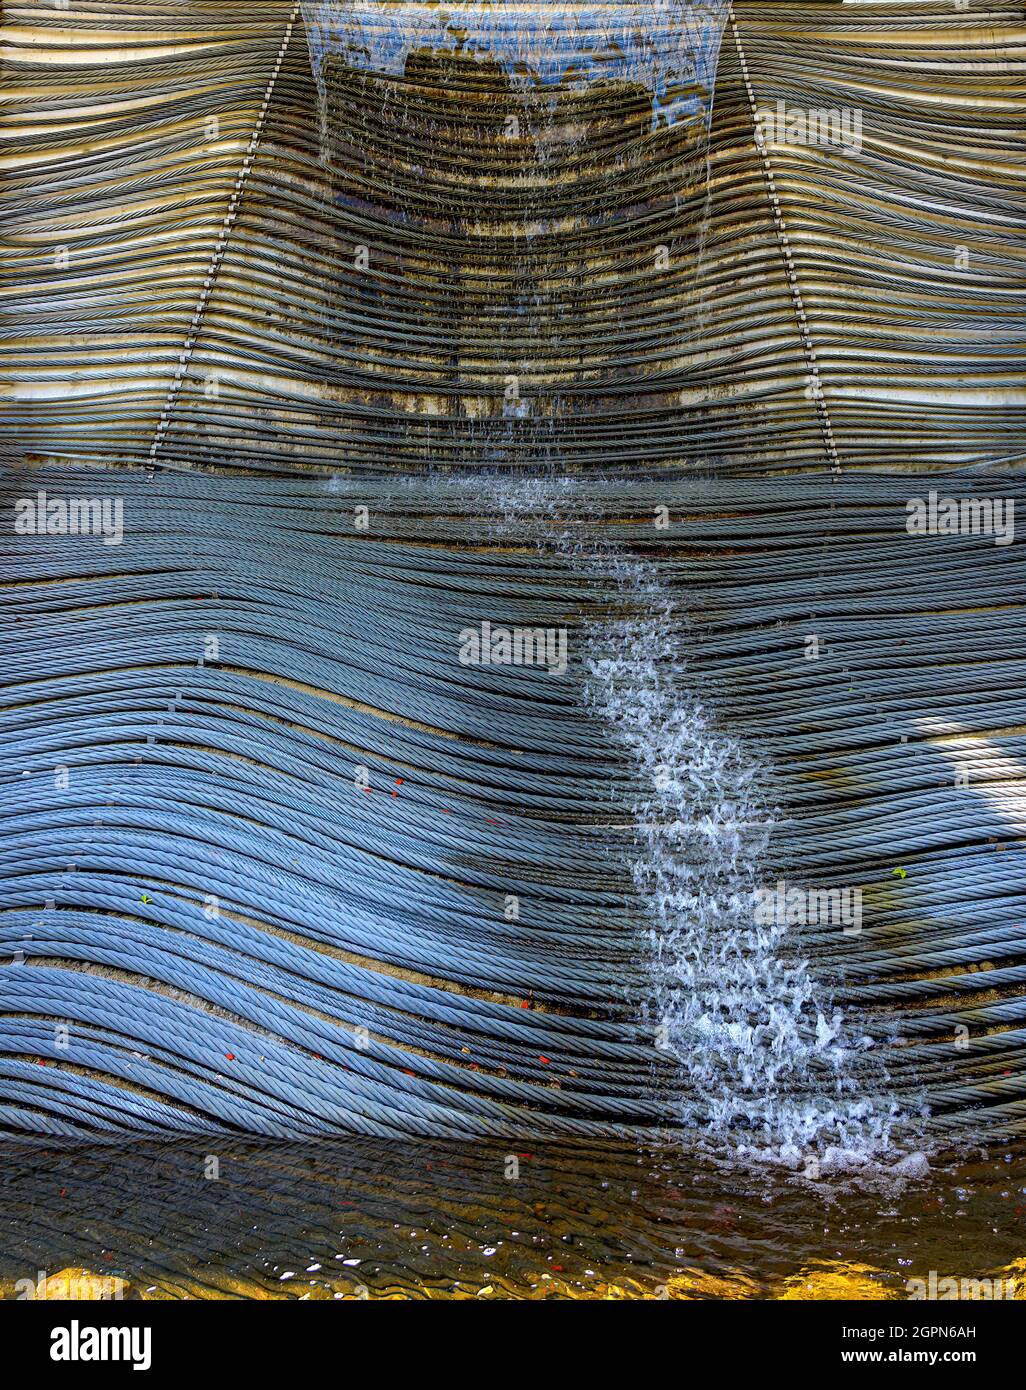 water is splashing over steel cables at an ornamental well in the region Pinzgau, Austria Stock Photo